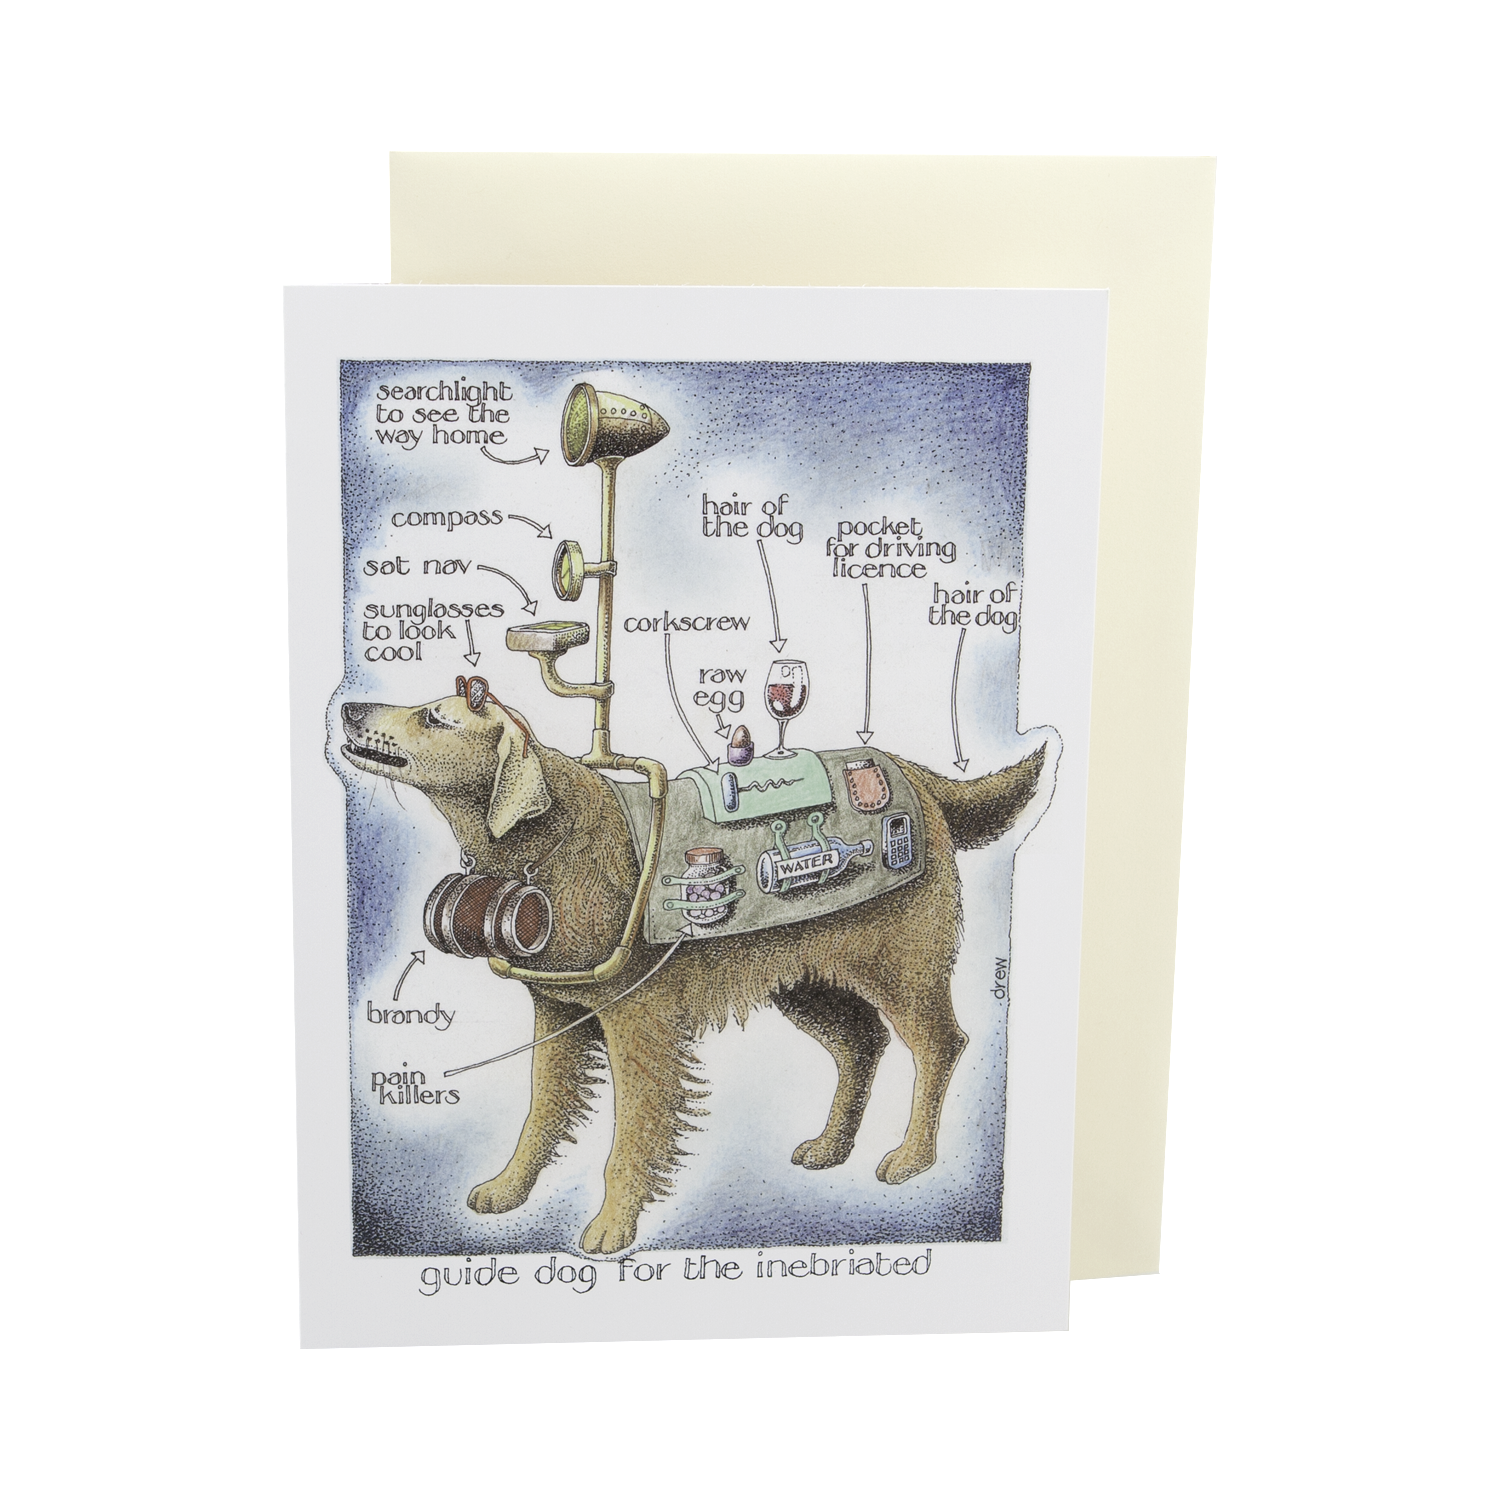 DogKrazy.Gifts – Simon Drew Guide Dog For The Inebriated Card, Humorous card featuring a Golden Retriever “guide dog” for the drunk. Part of the Simon Drew Dog Collection available from Dog Krazy Gifts